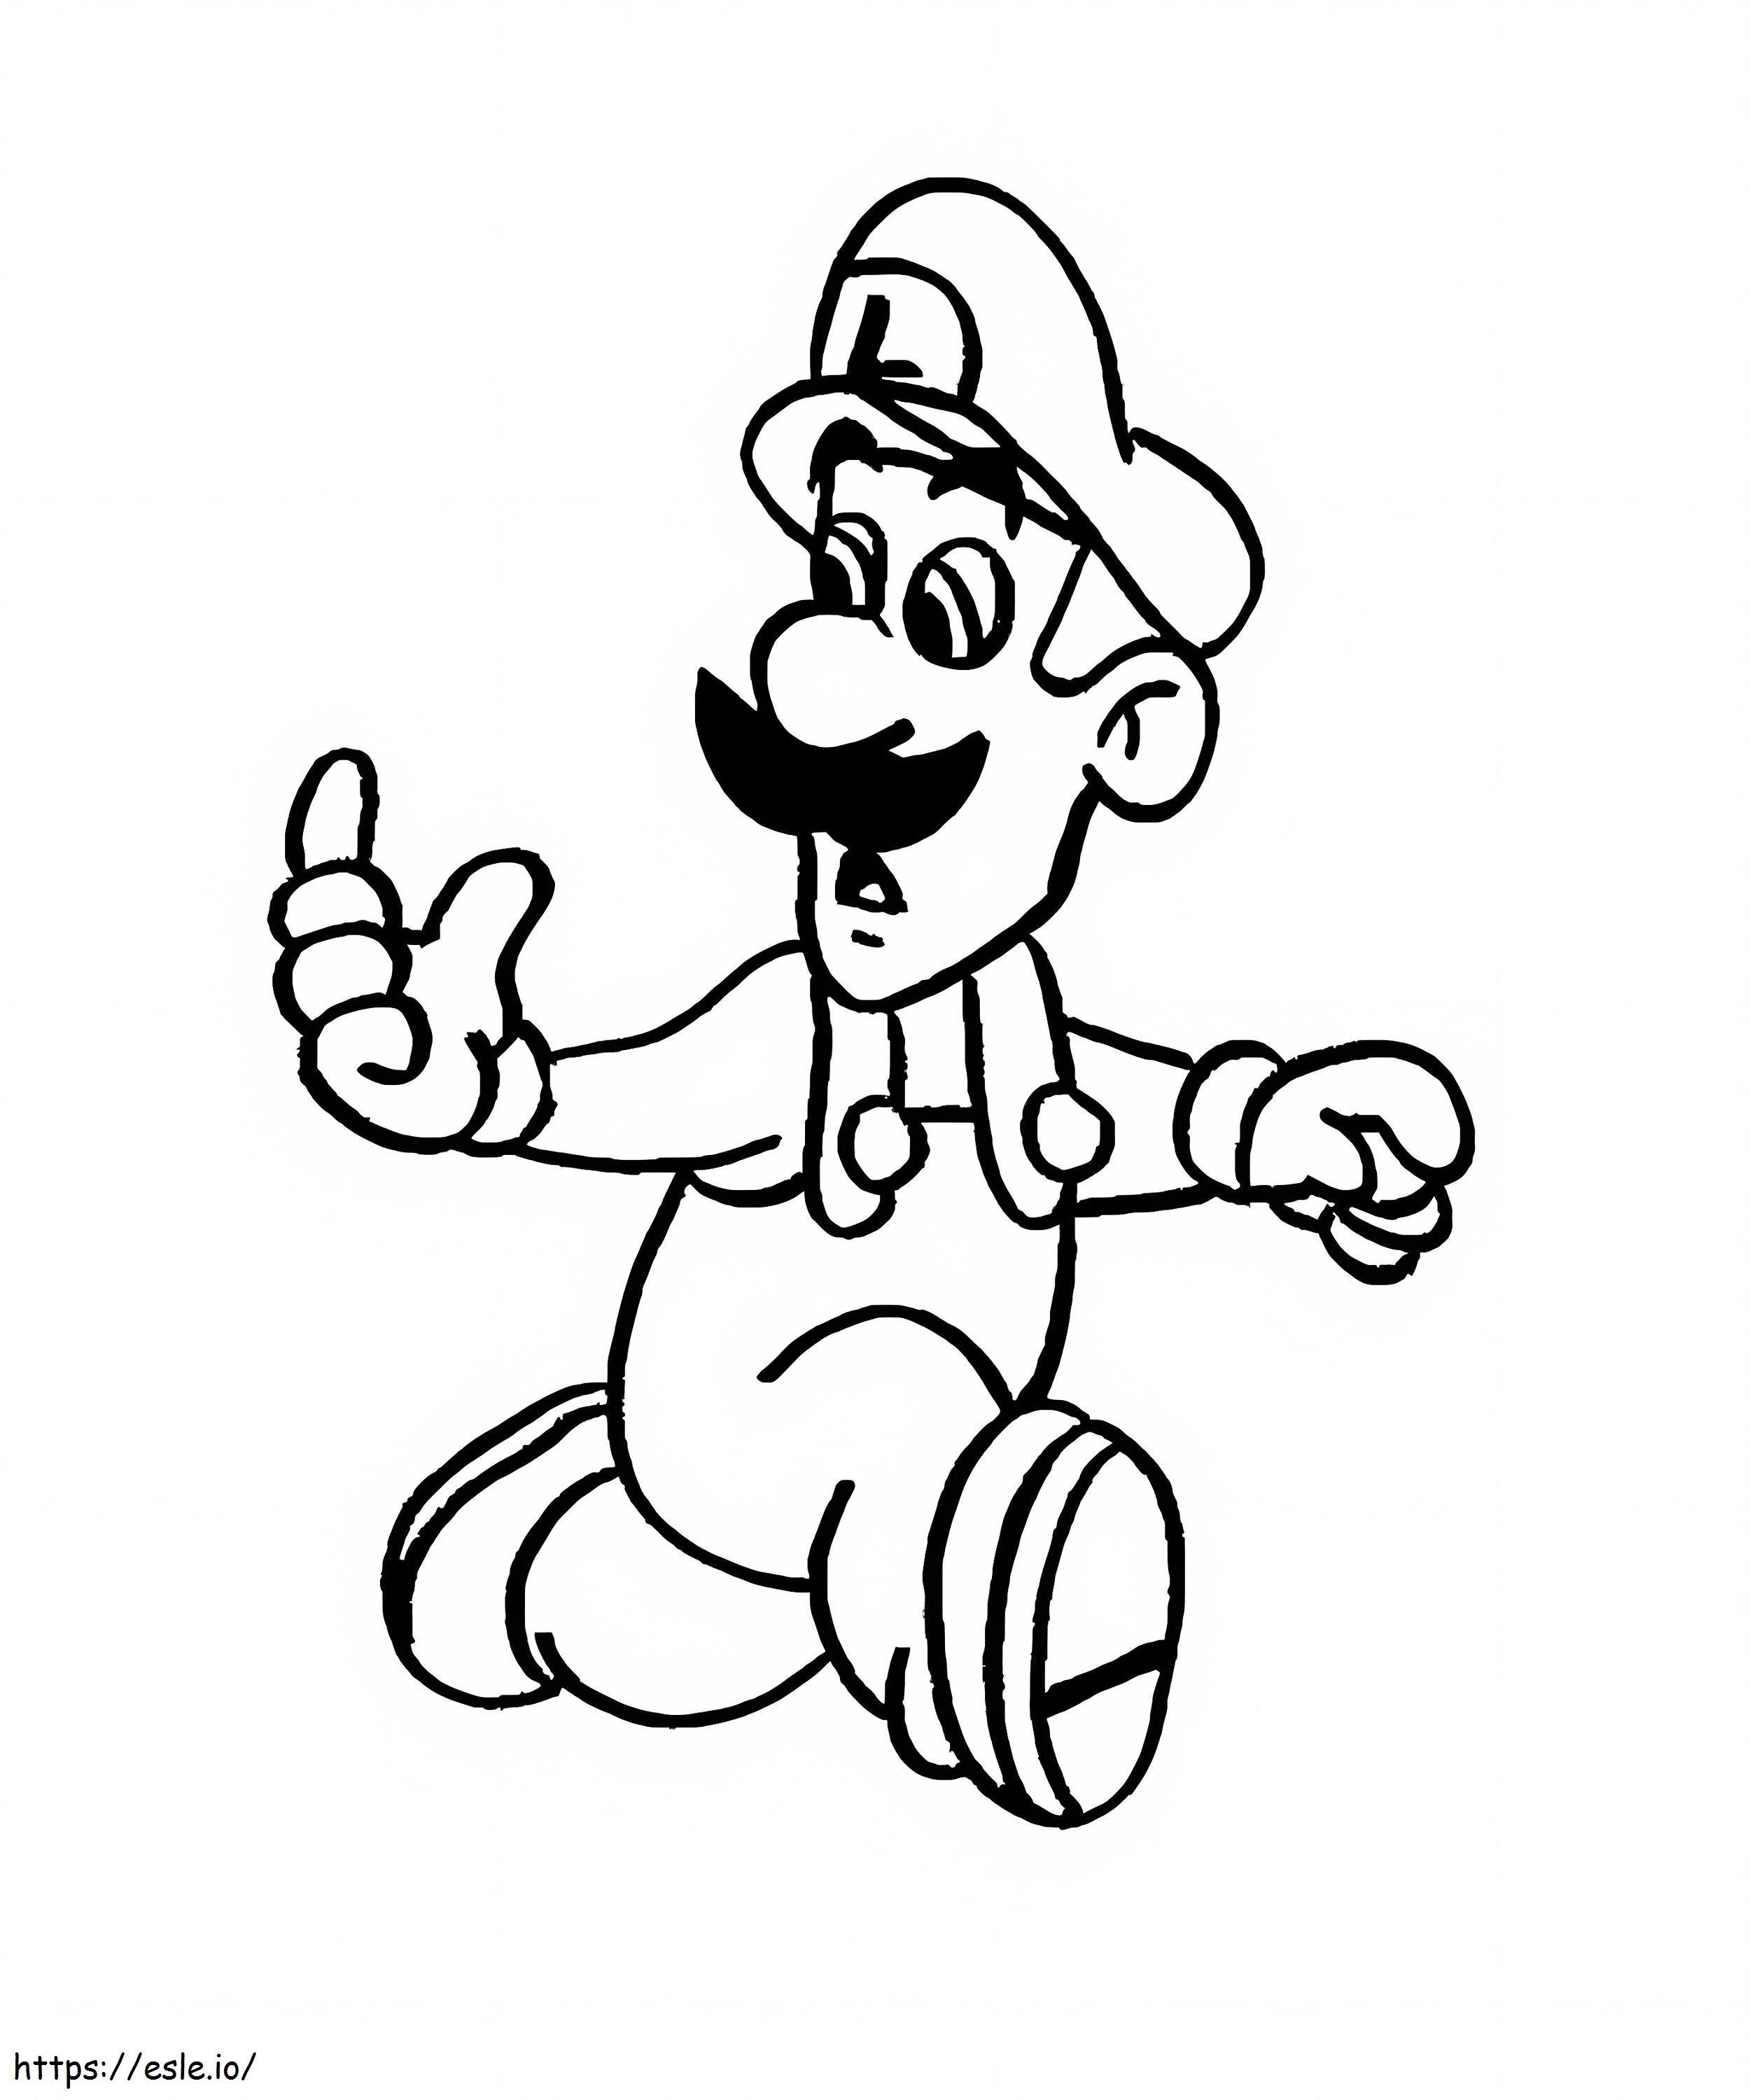 Luigi And Monster coloring page